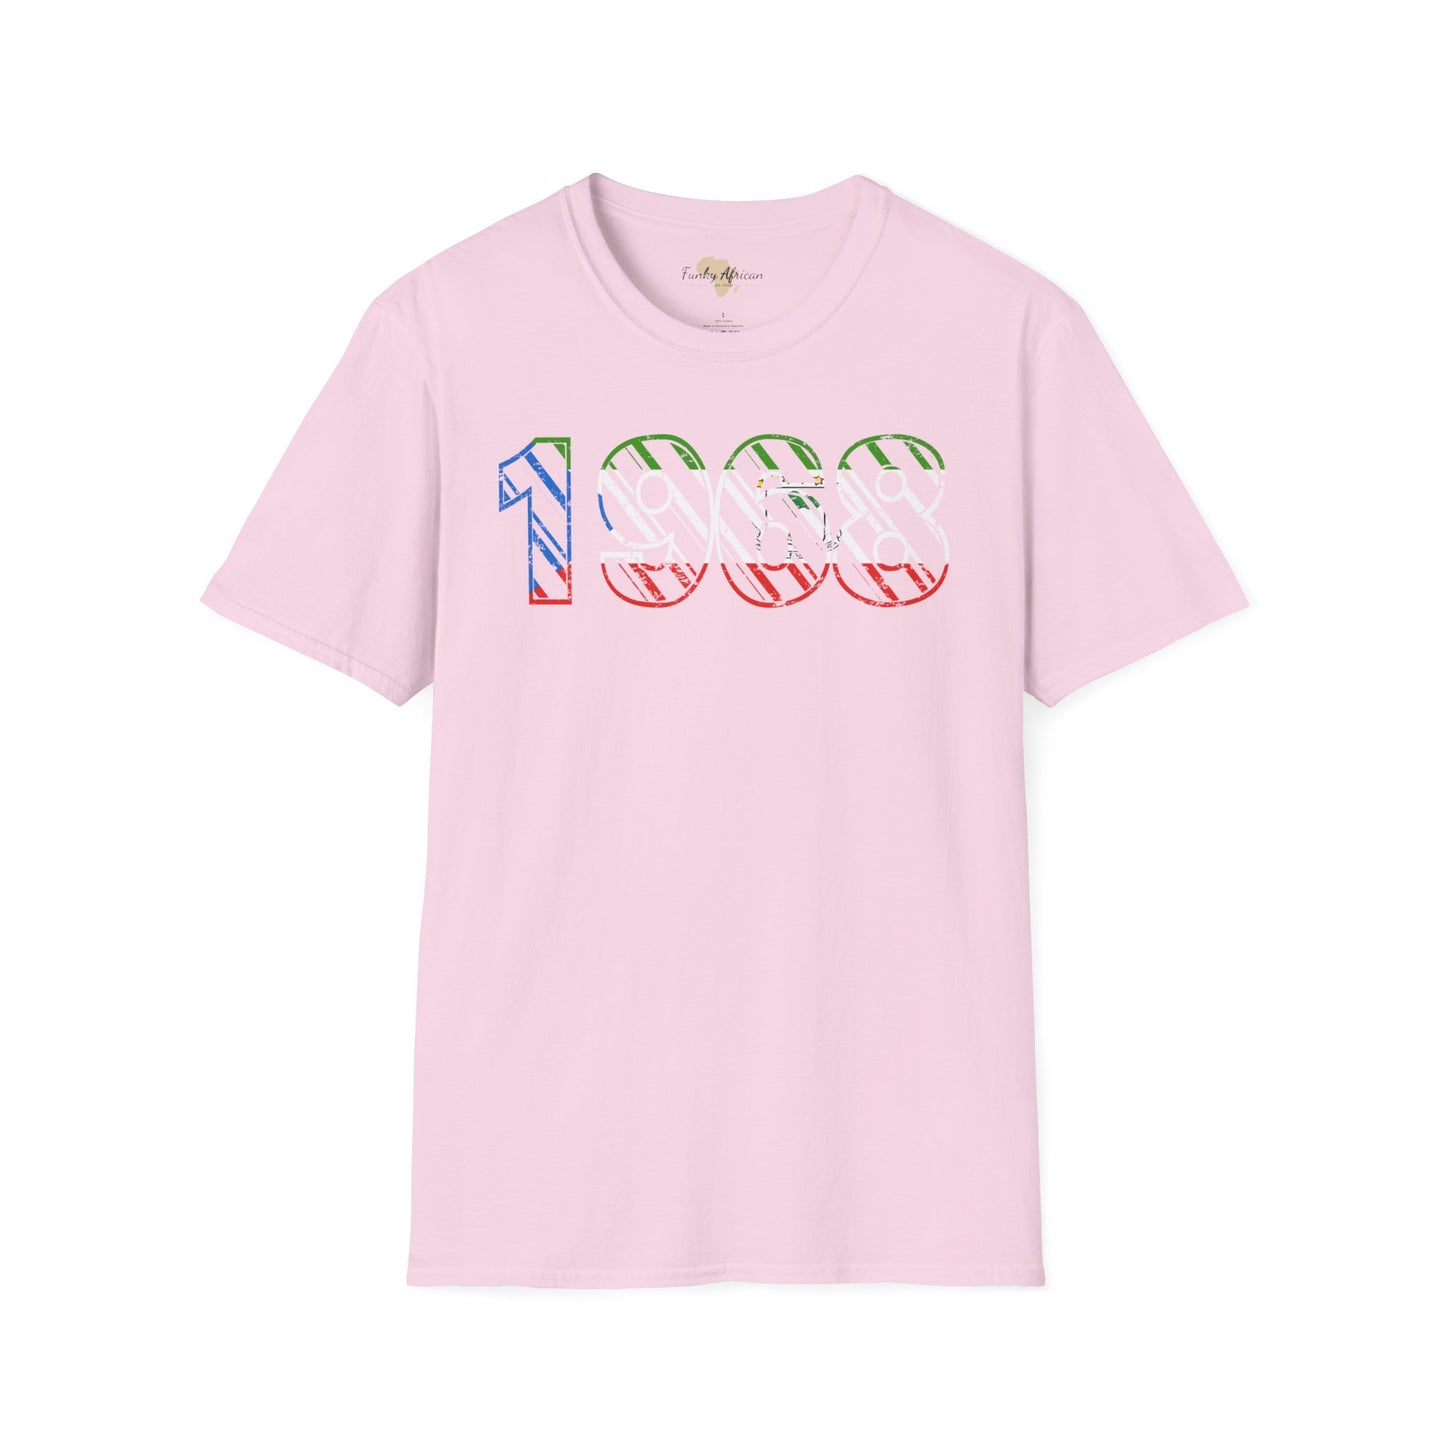 Equatorial Guinea year unisex softstyle tee